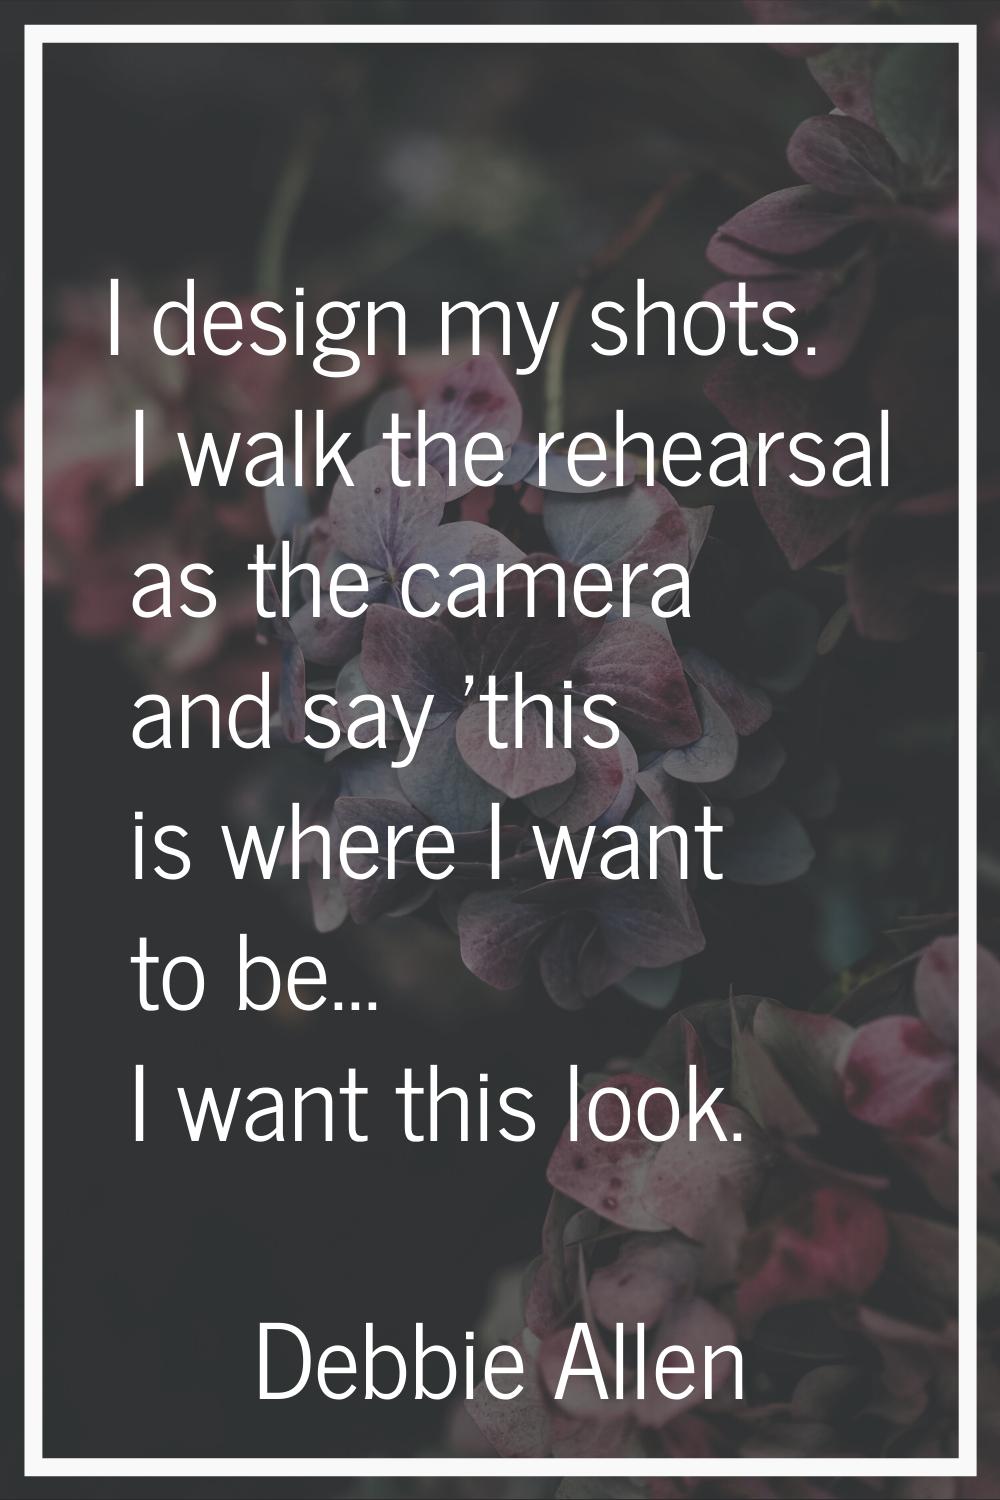 I design my shots. I walk the rehearsal as the camera and say 'this is where I want to be... I want